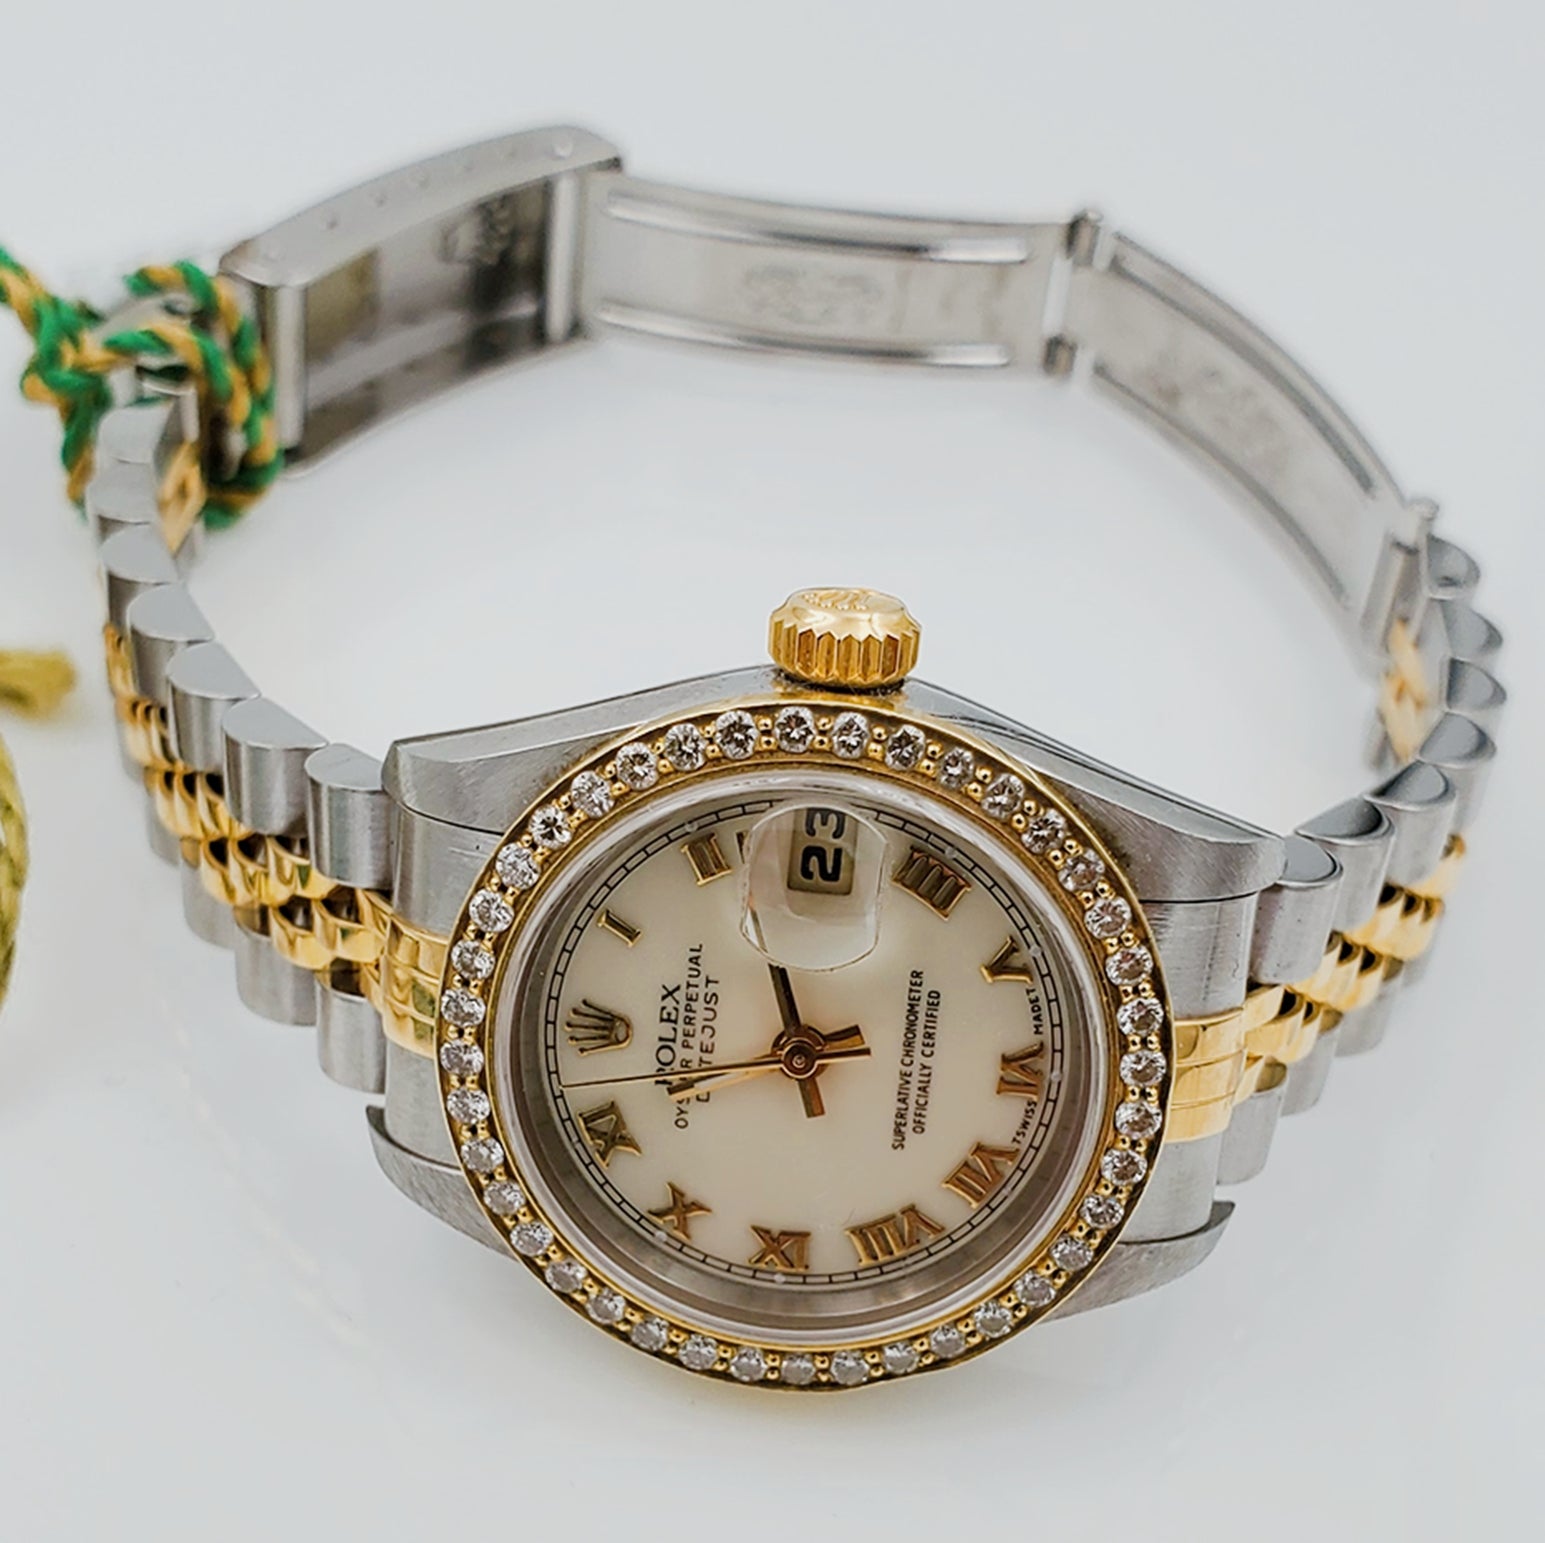 Ladies Rolex 18K Gold Two Tone 26mm DateJust Watch with Off-White Dial, Roman Numerals and Diamond Bezel. (Pre-Owned)